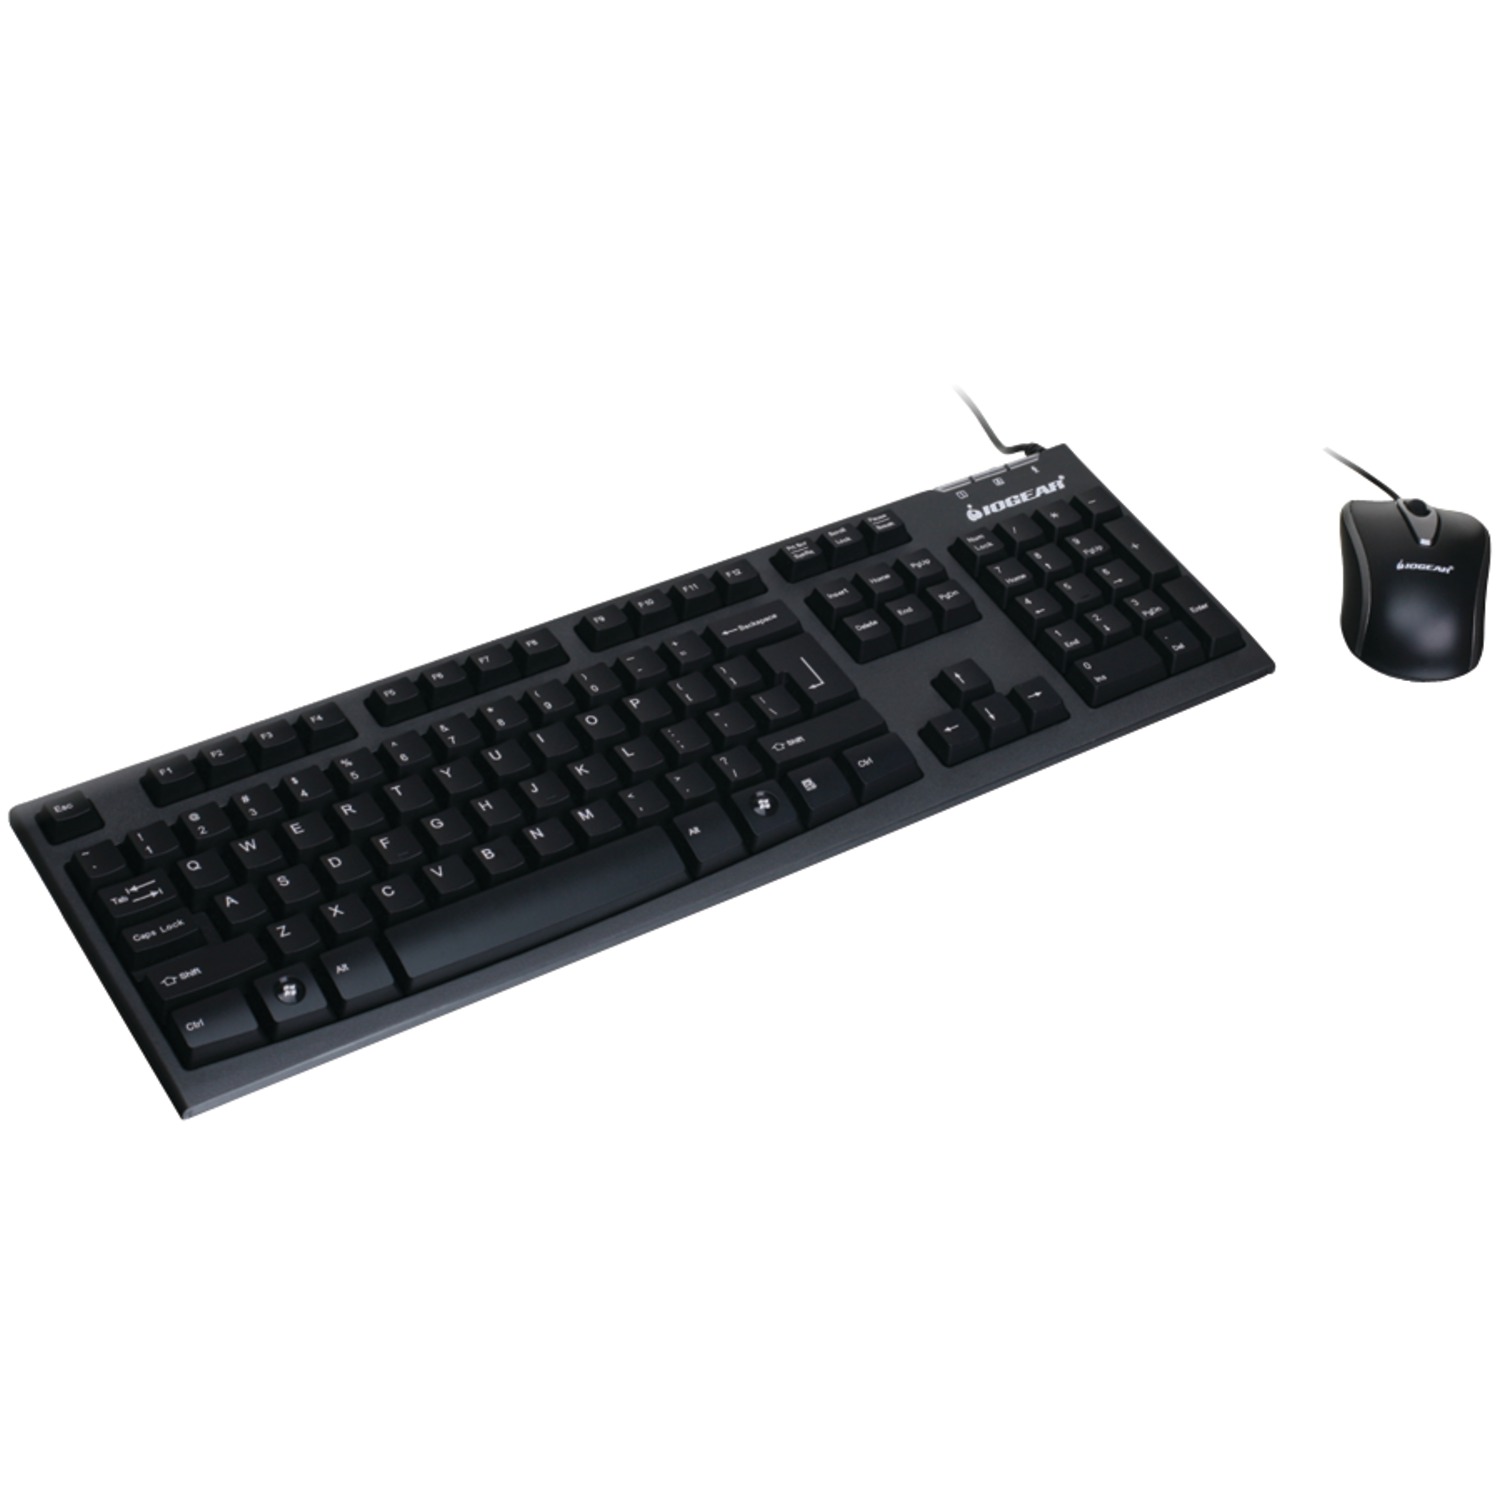 IOGEAR Spill-Resistant Keyboard and Mouse Combo, Black - image 4 of 4